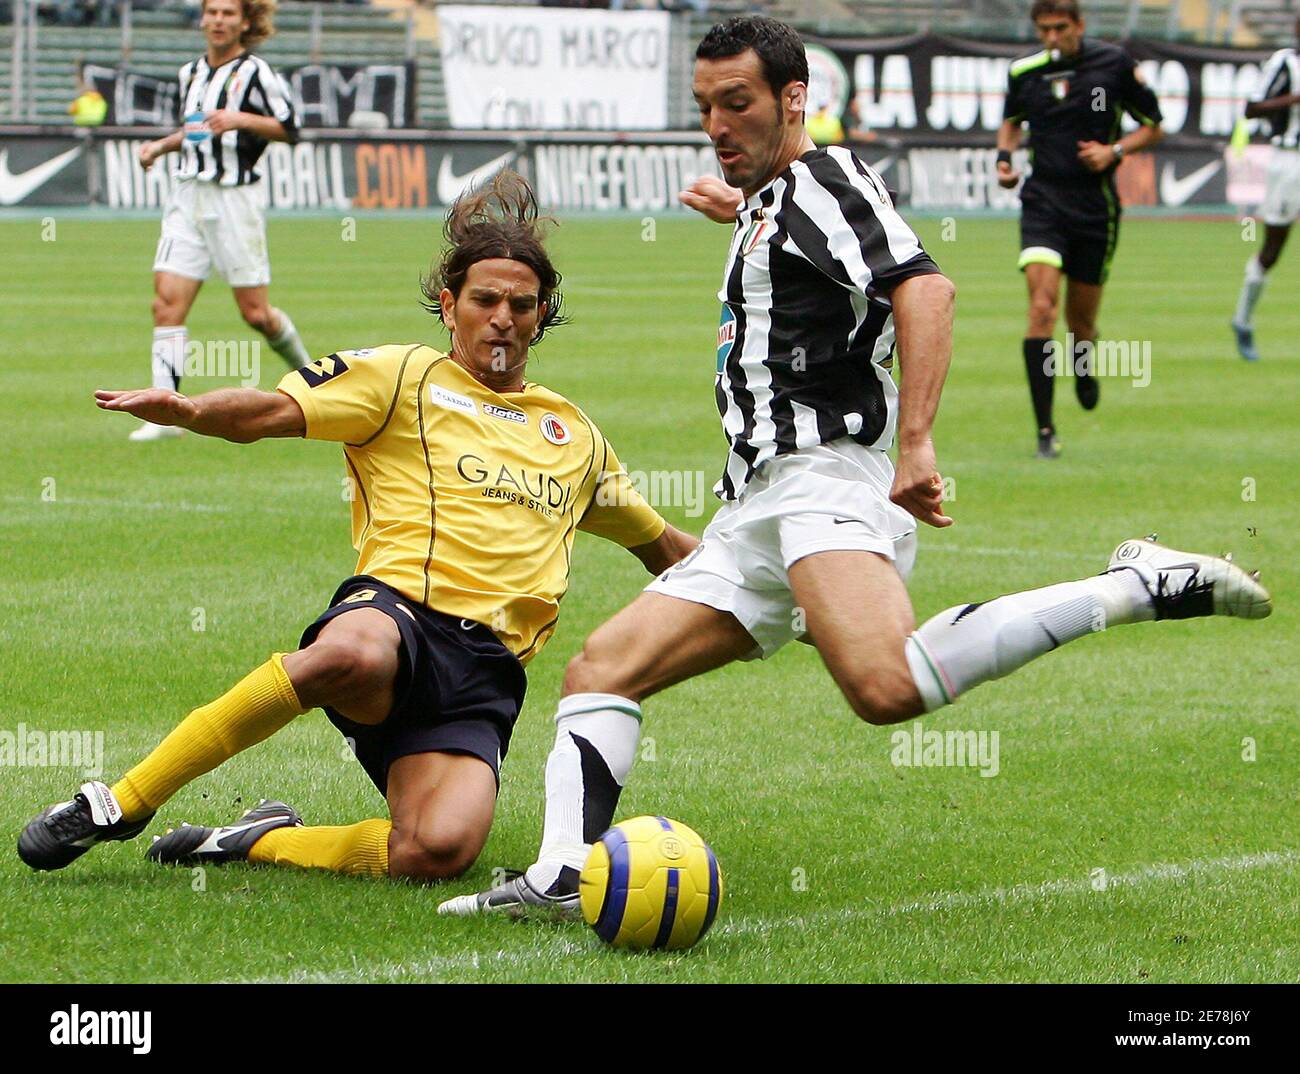 Juventus's Gianluca Zambrotta (R) and Cudini Mirko of Ascoli fight for the  ball during their Italian Serie A soccer match at the Delle Alpi stadium in  Turin, northern Italy, September 18, 2005.